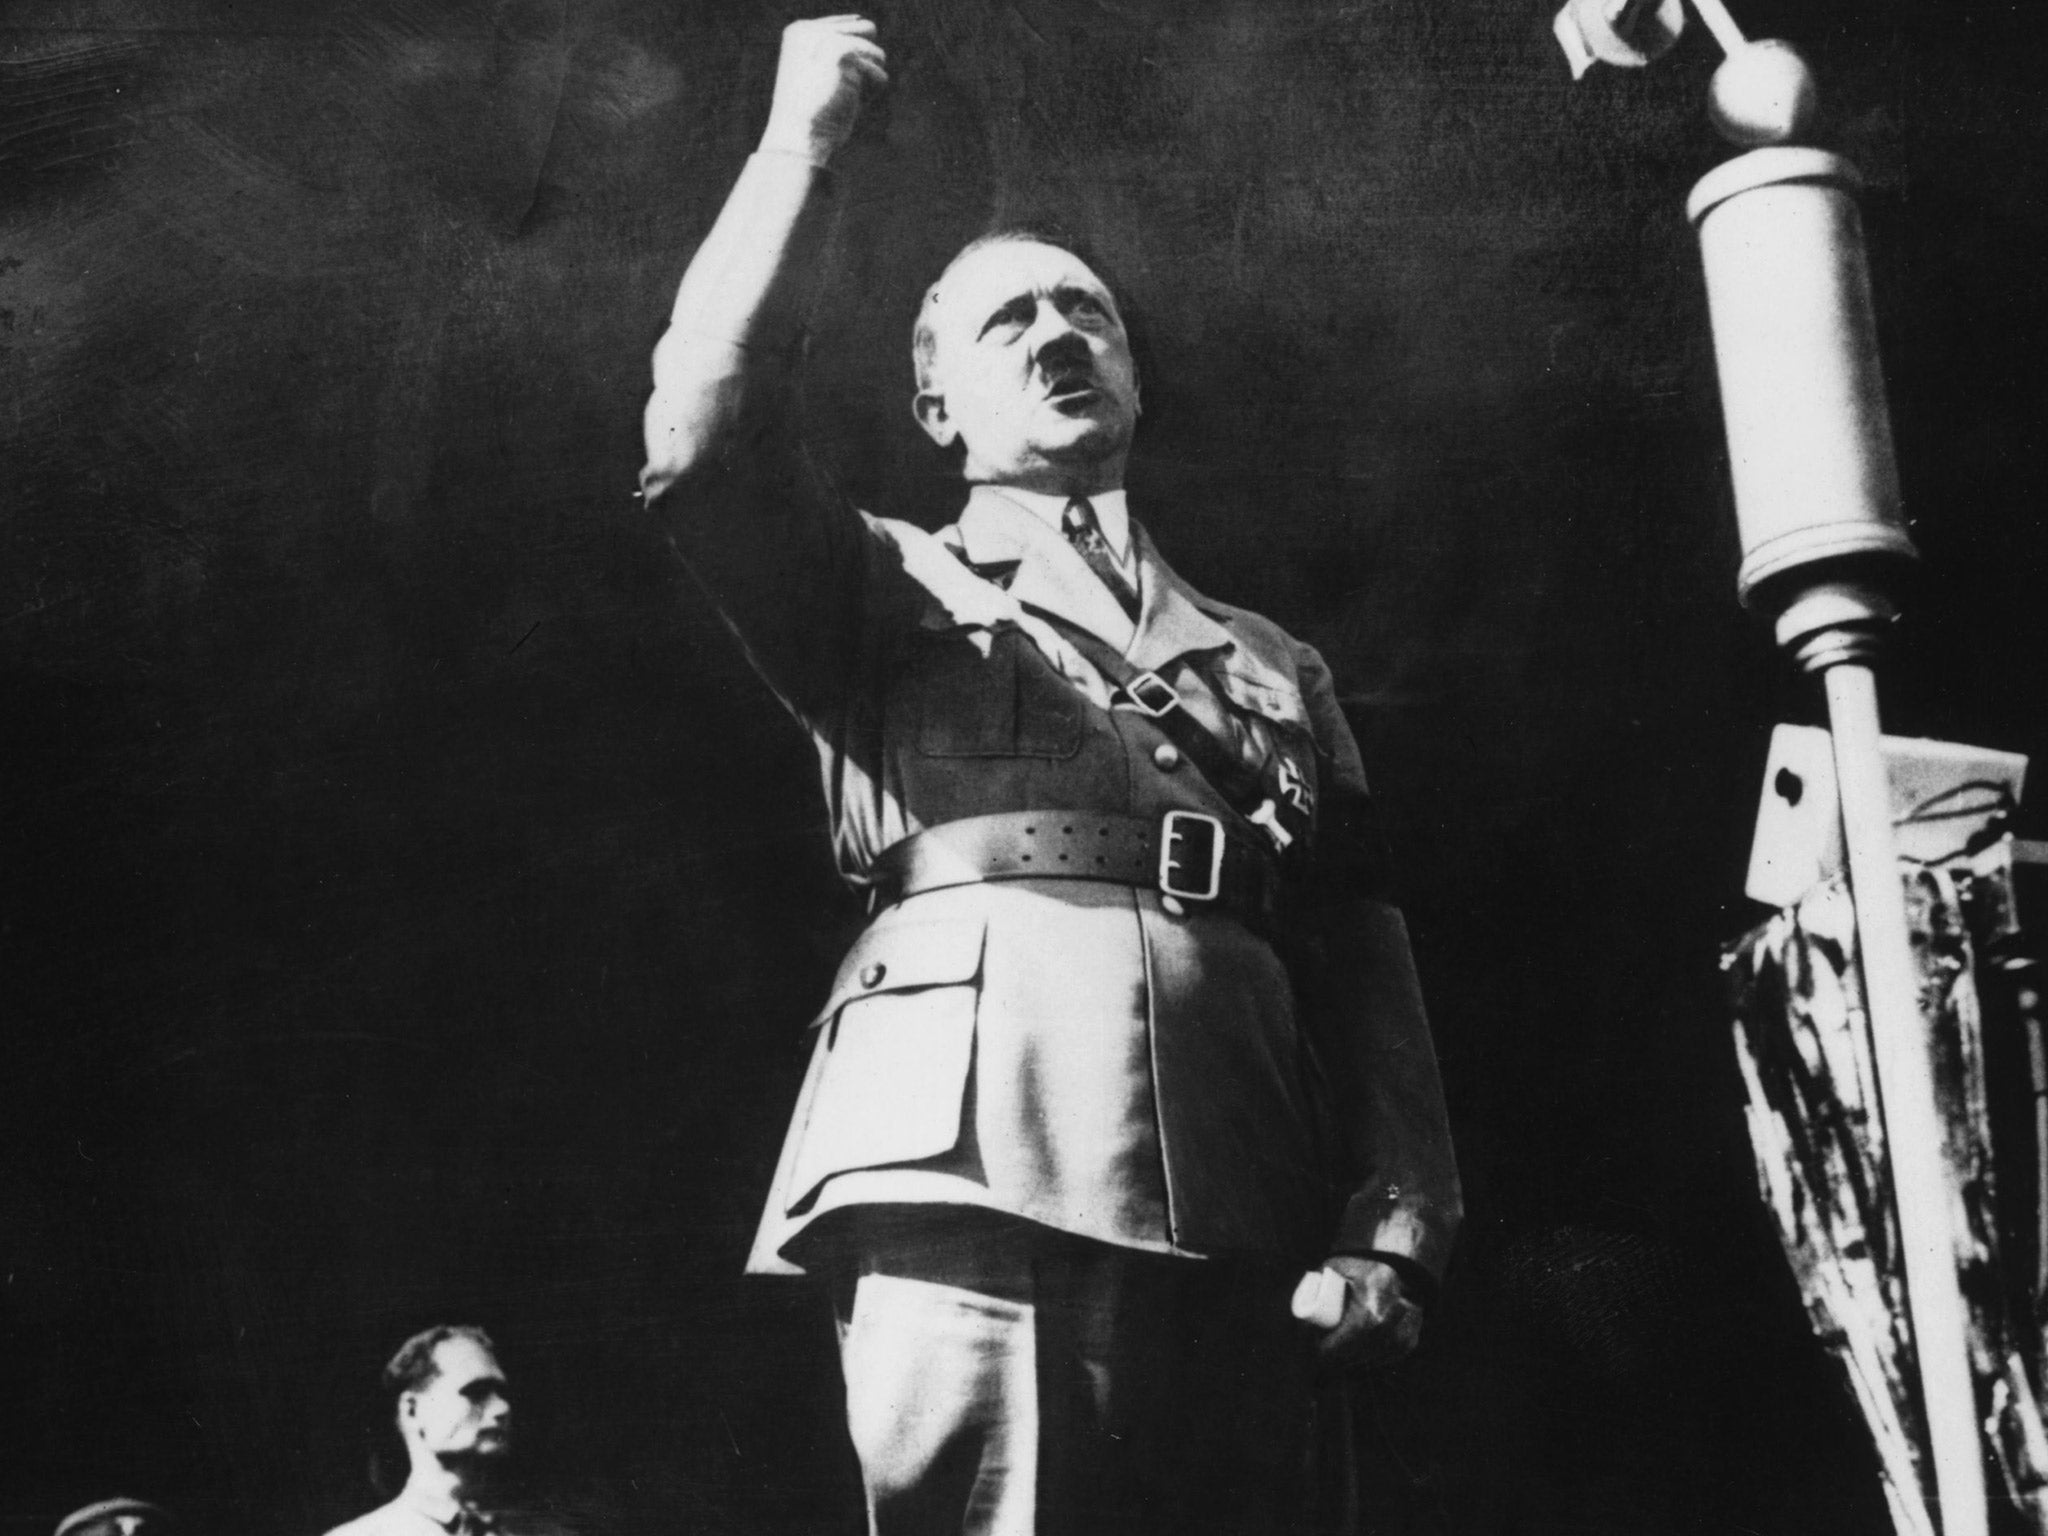 Adolf Hitler addresses a crowd at a rally in 1941